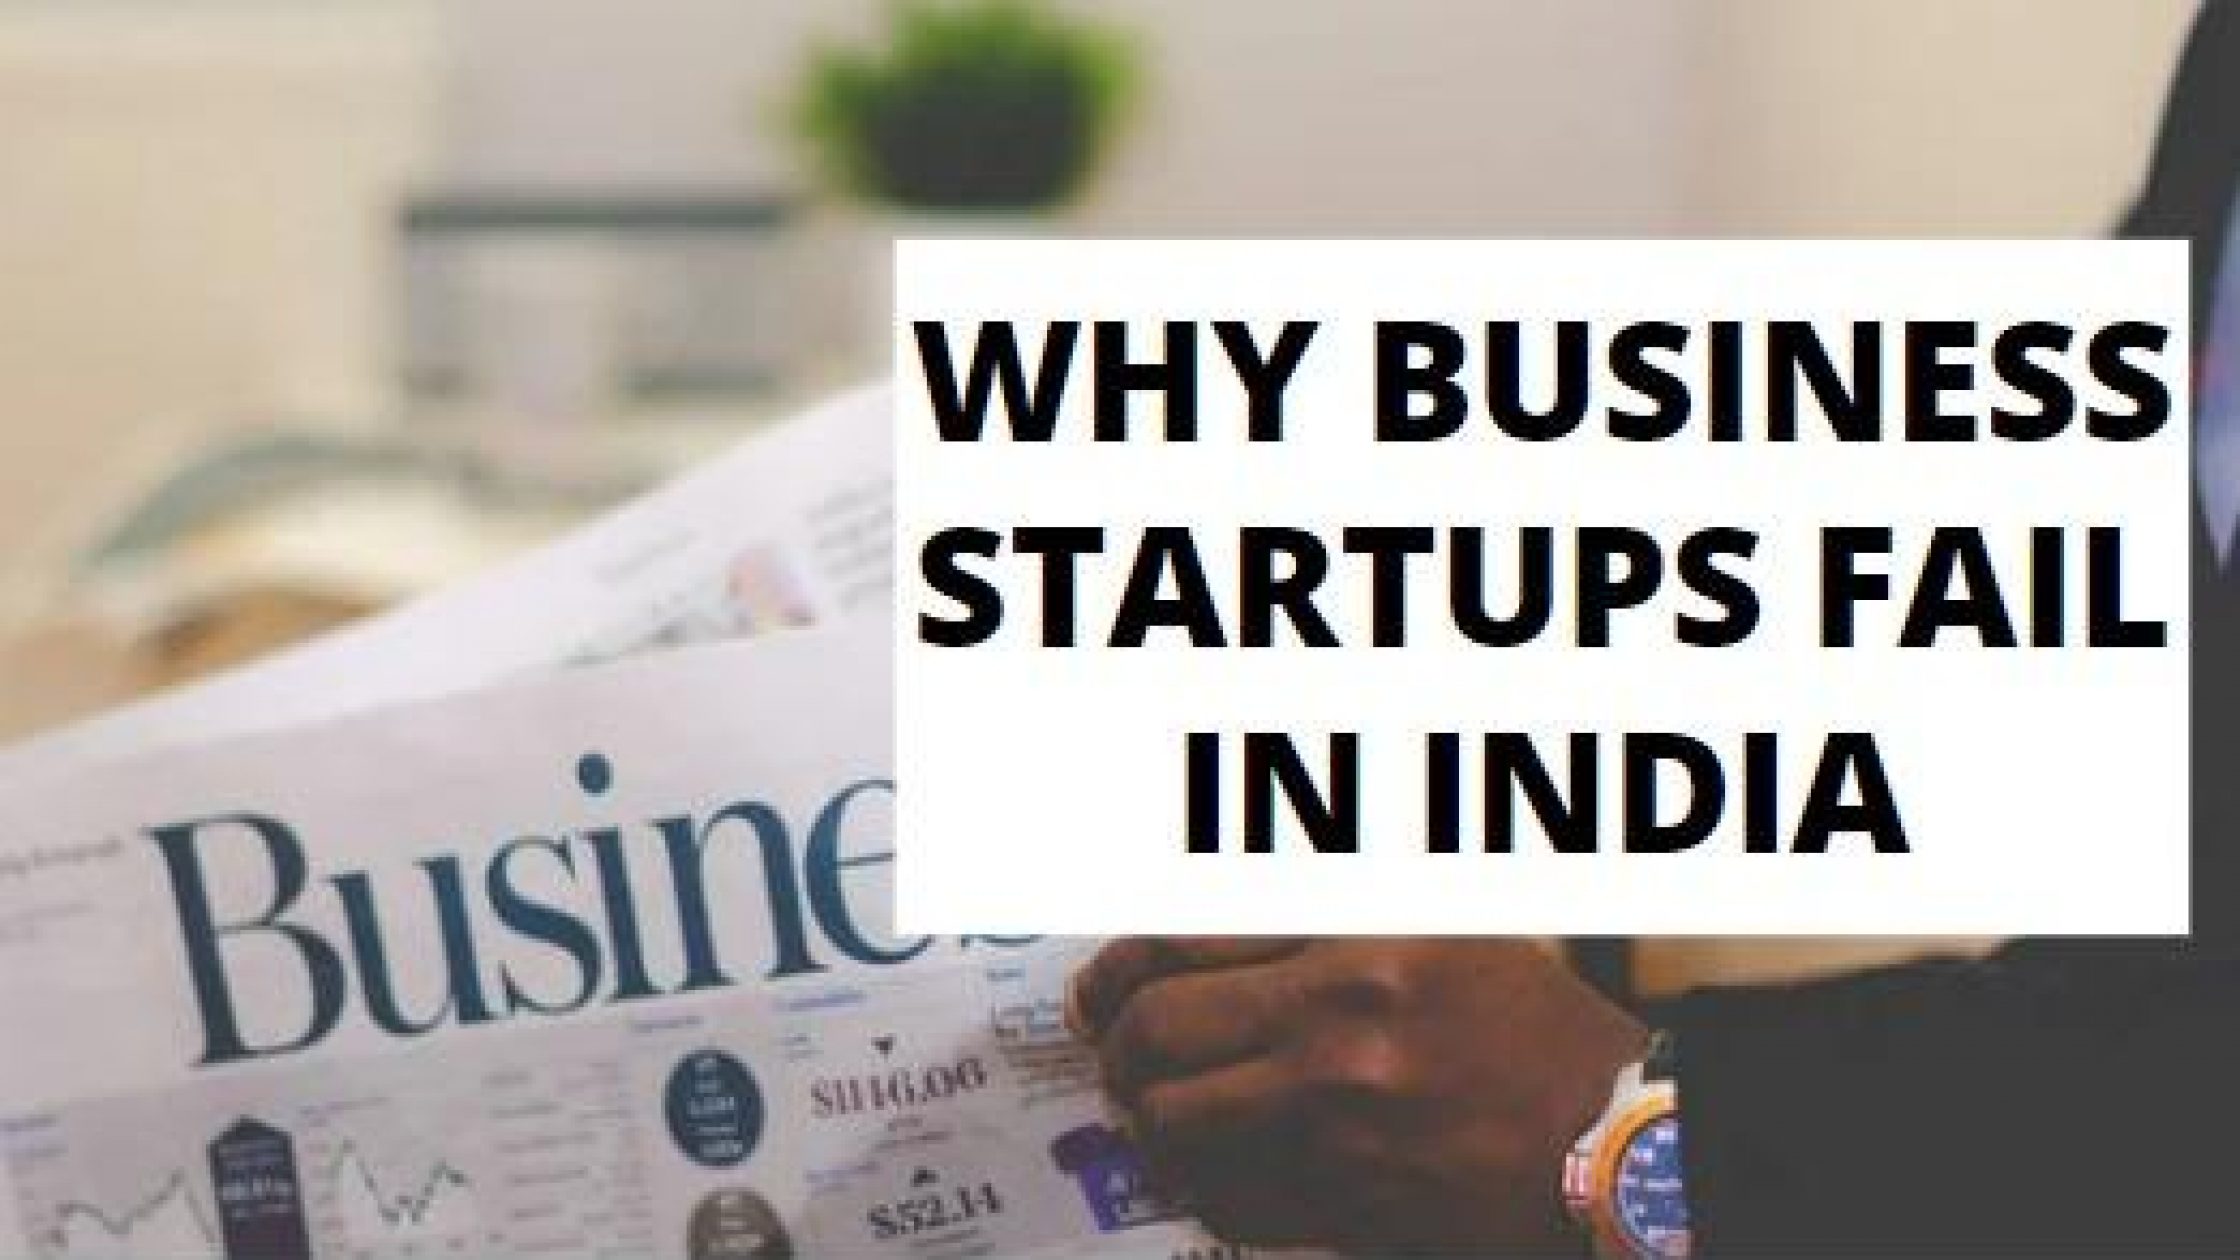 Why Business Startups Fail In India? 11 Reasons + Case Studies